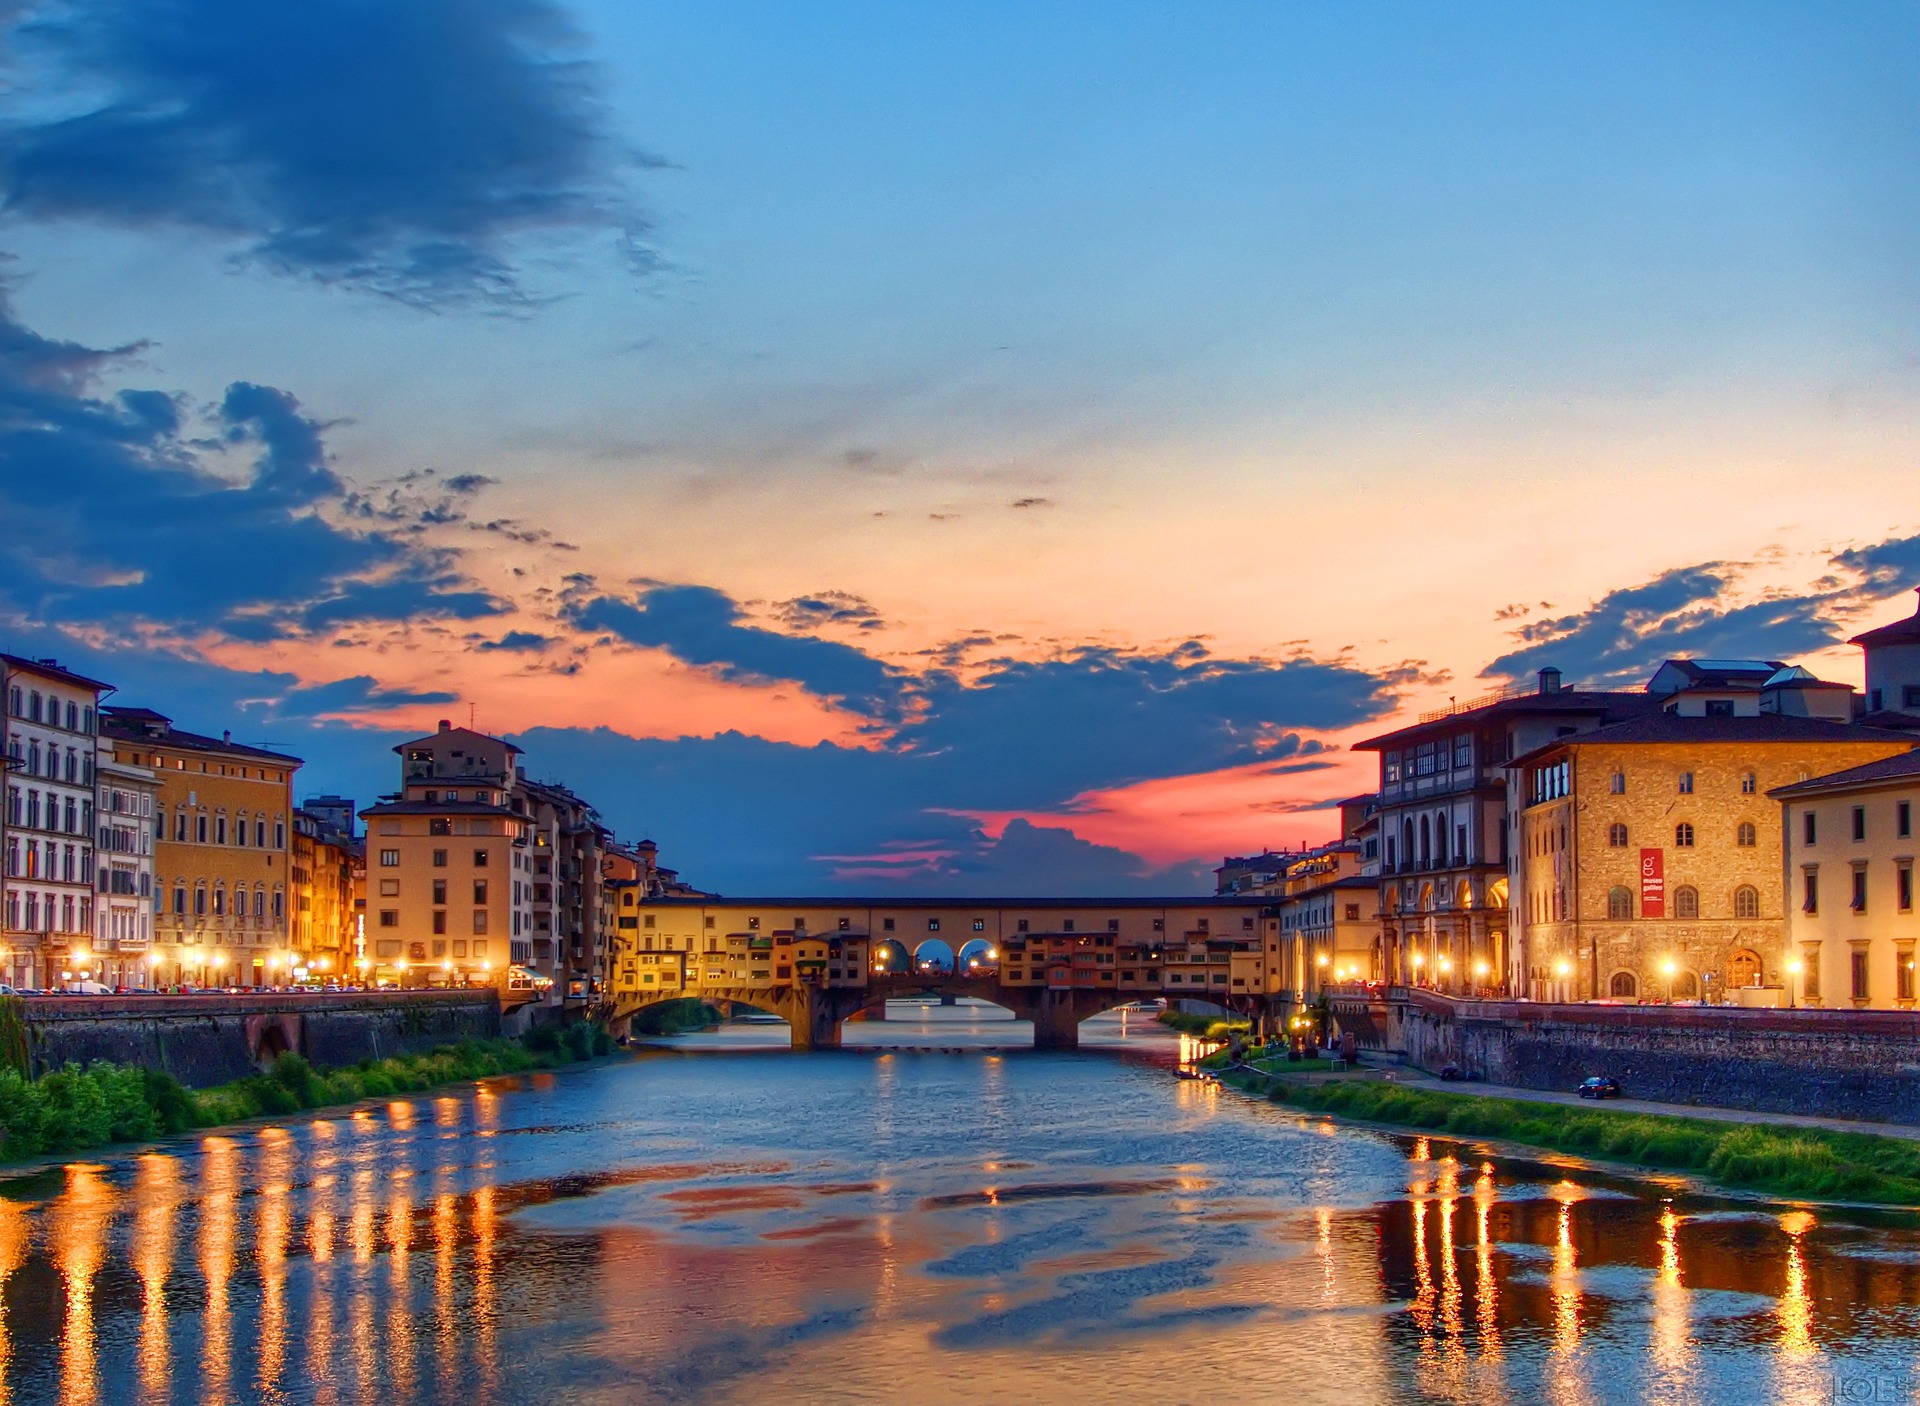 Sunset over the Ponte Vecchio, Florence, Italy